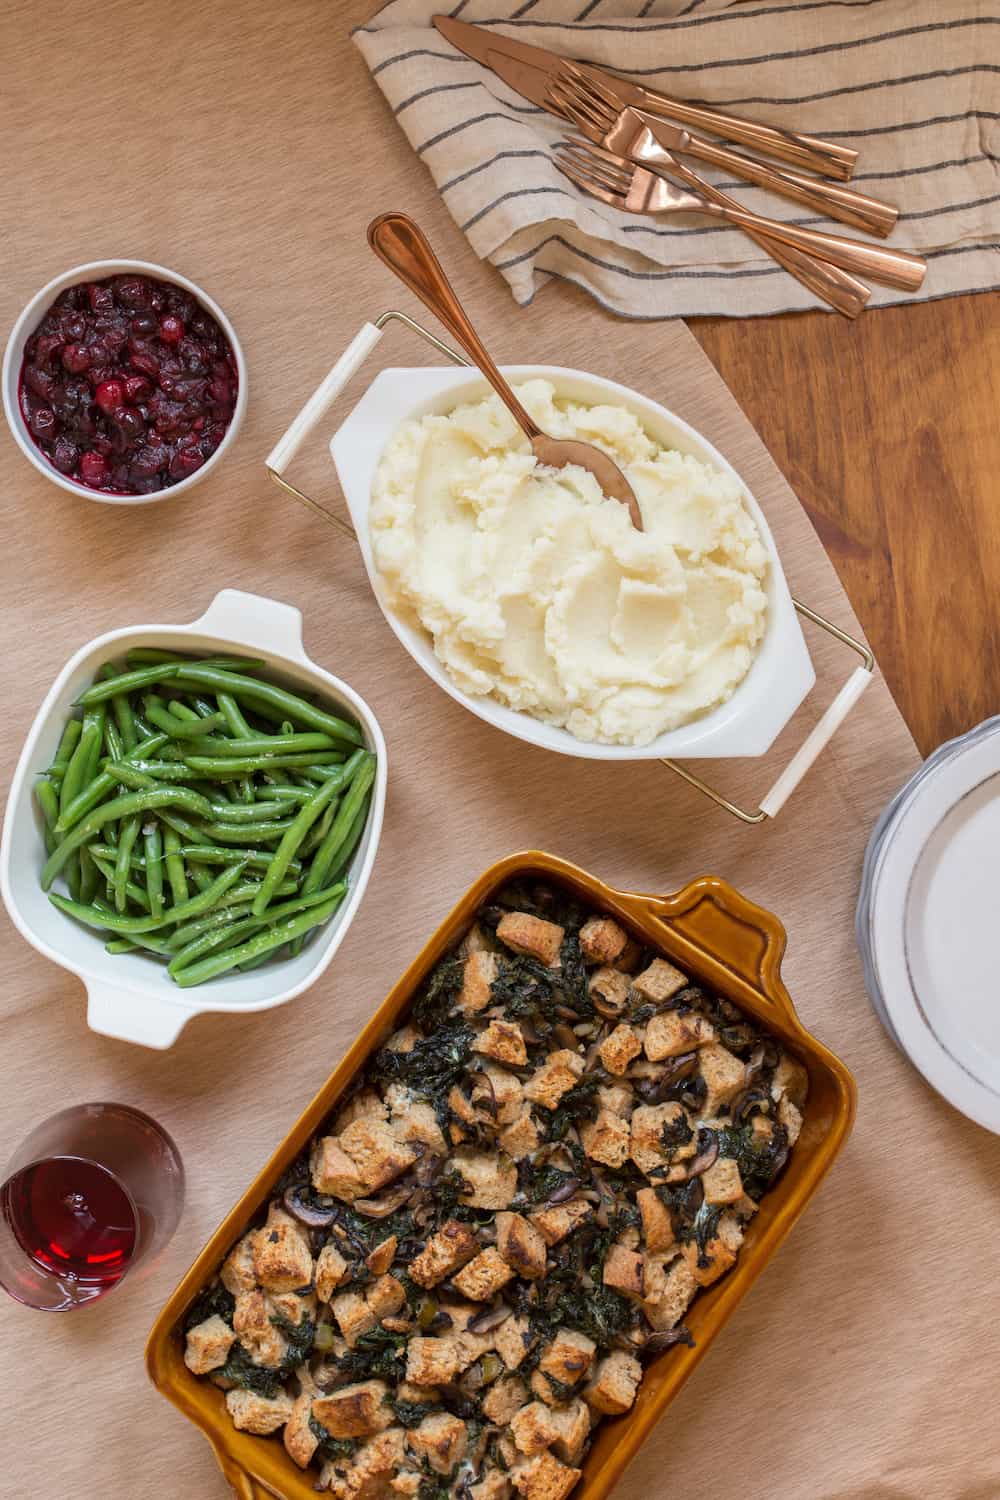 The Thanksgiving Timeline: How to Organize Your Prep